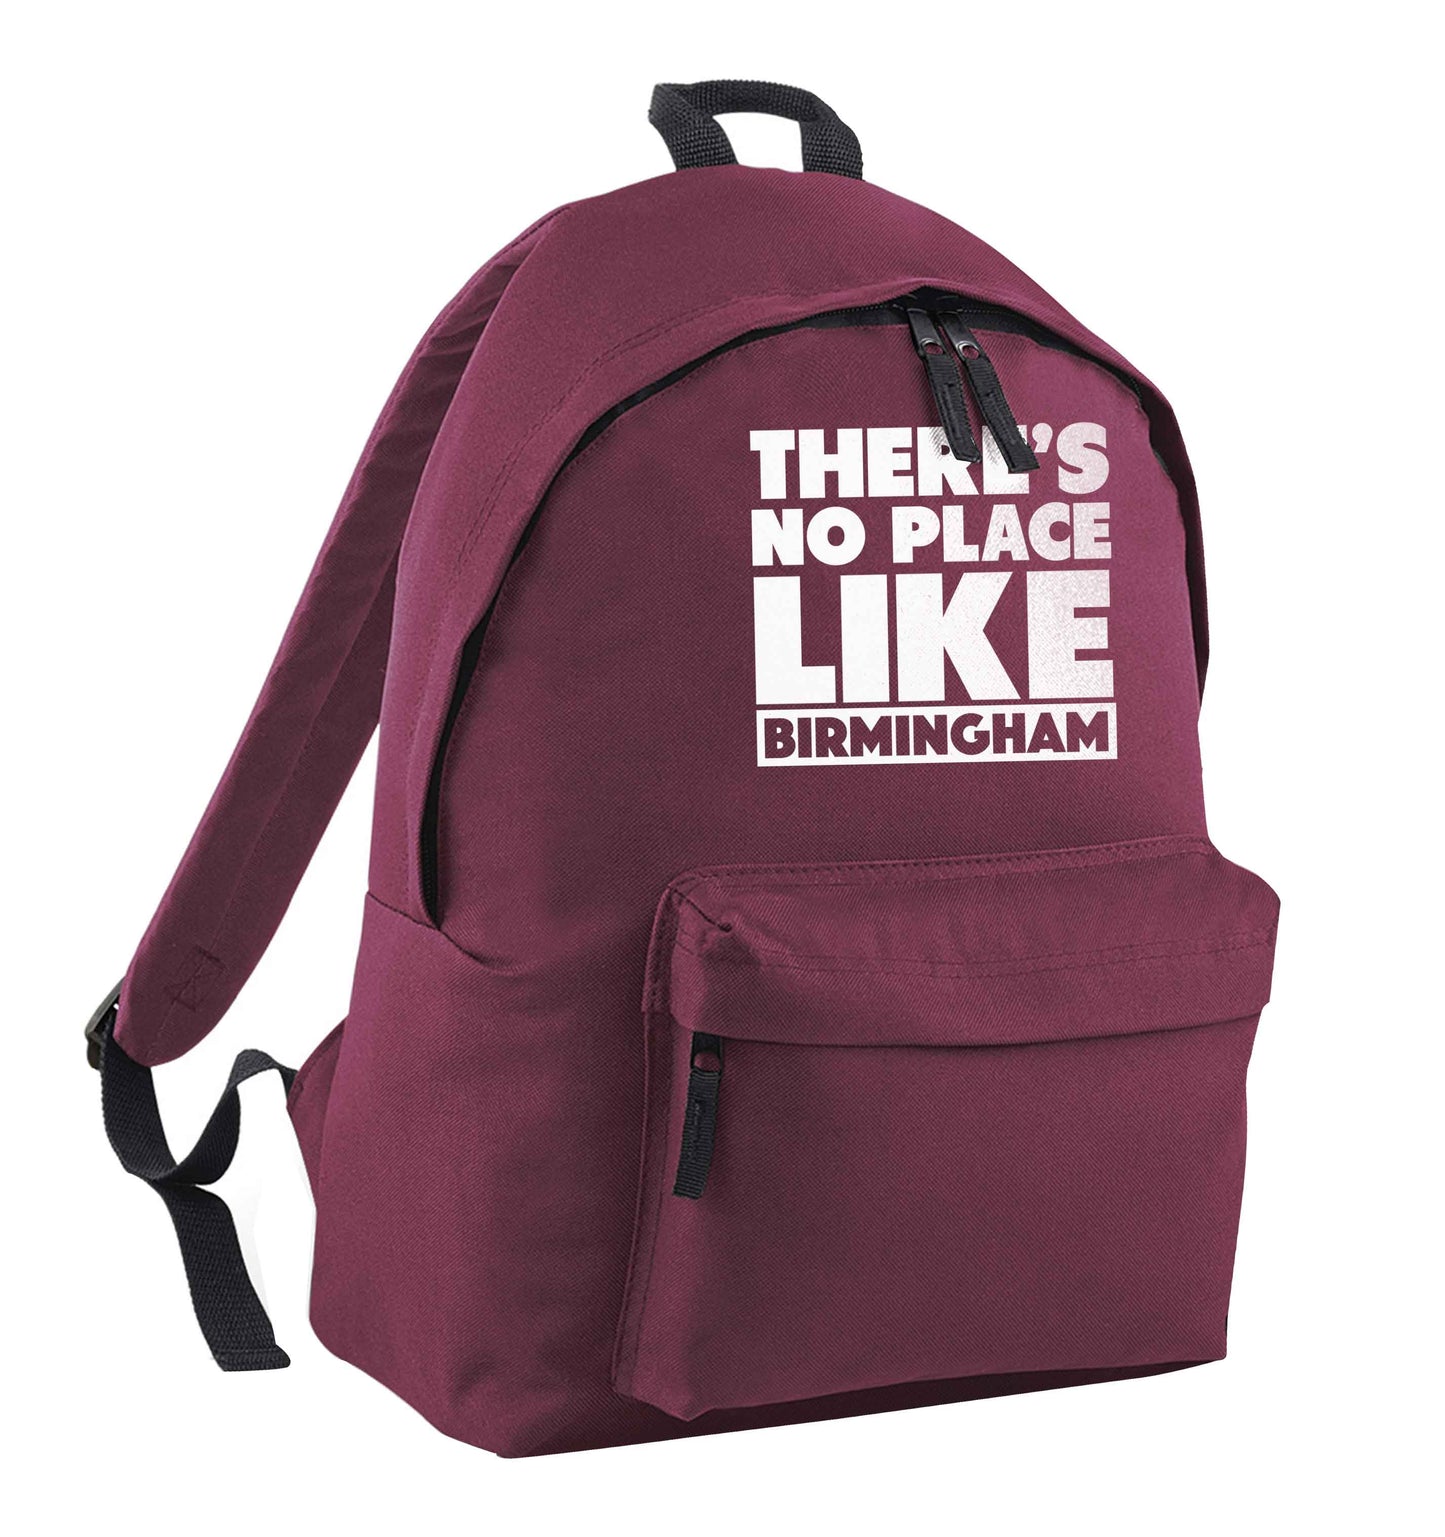 There's no place like Birmingham maroon adults backpack